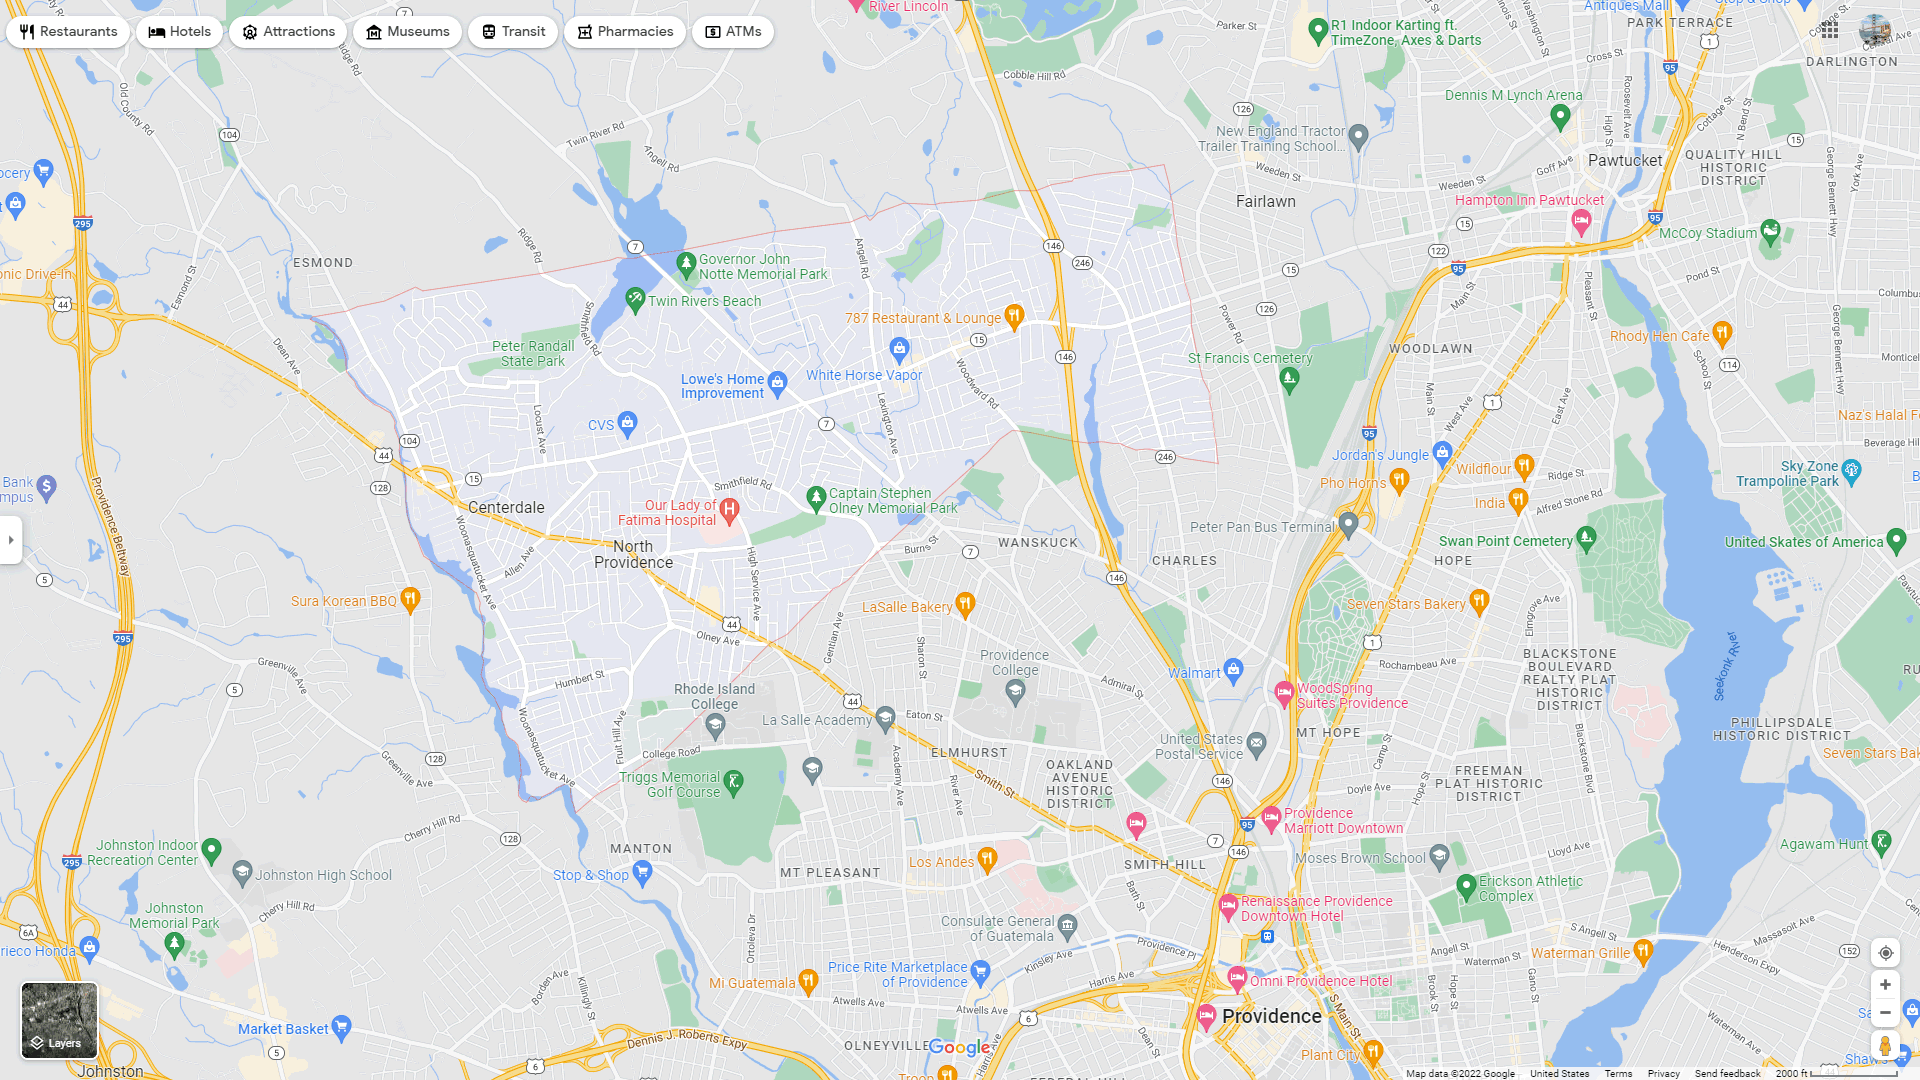 North Providence Town map